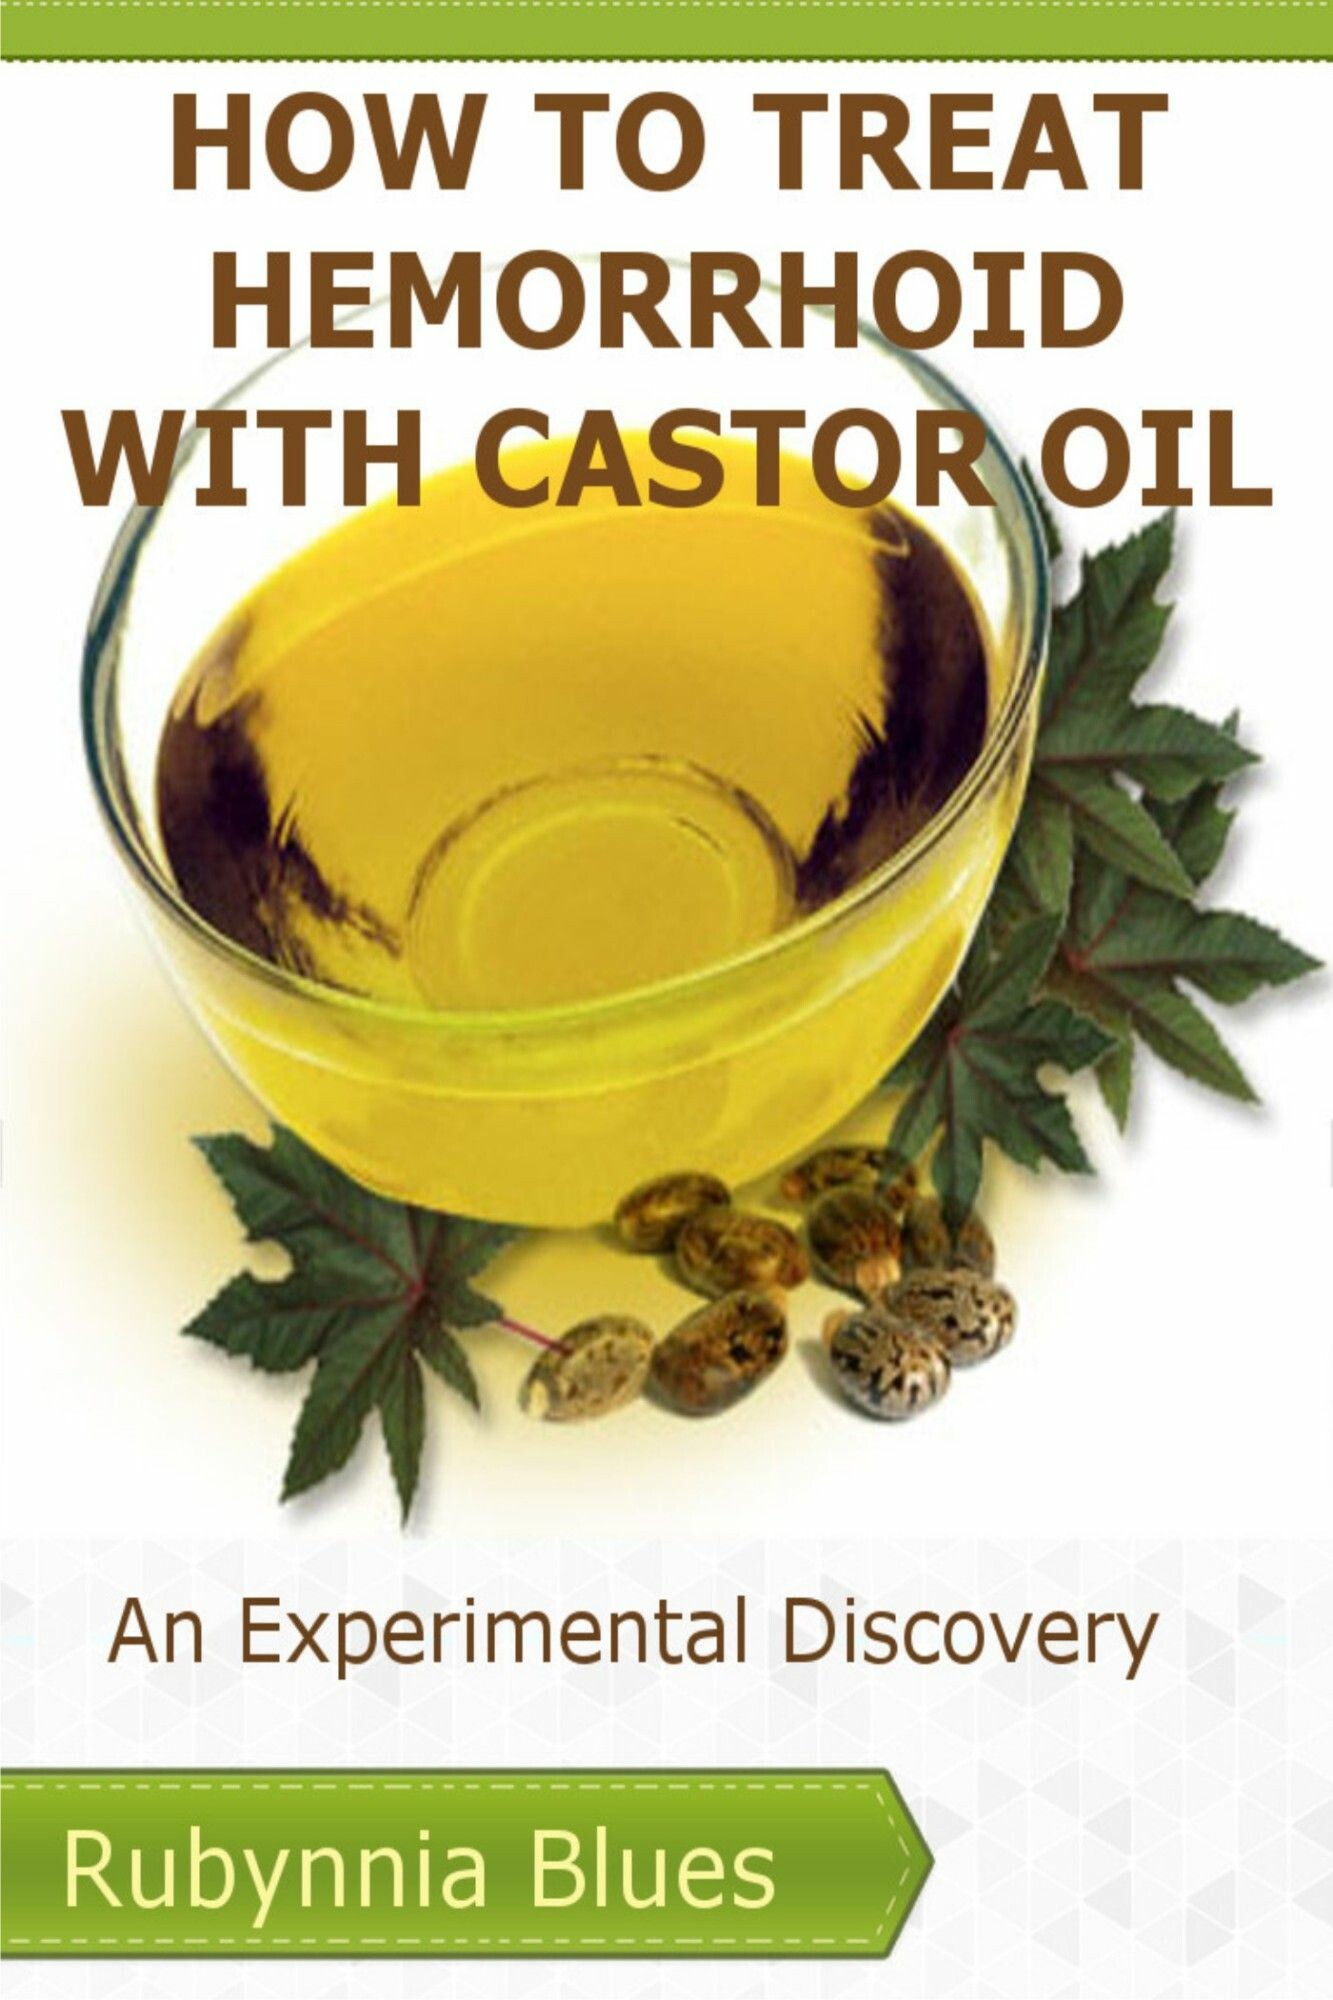 How to Treat Hemorrhoid with Castor Oil